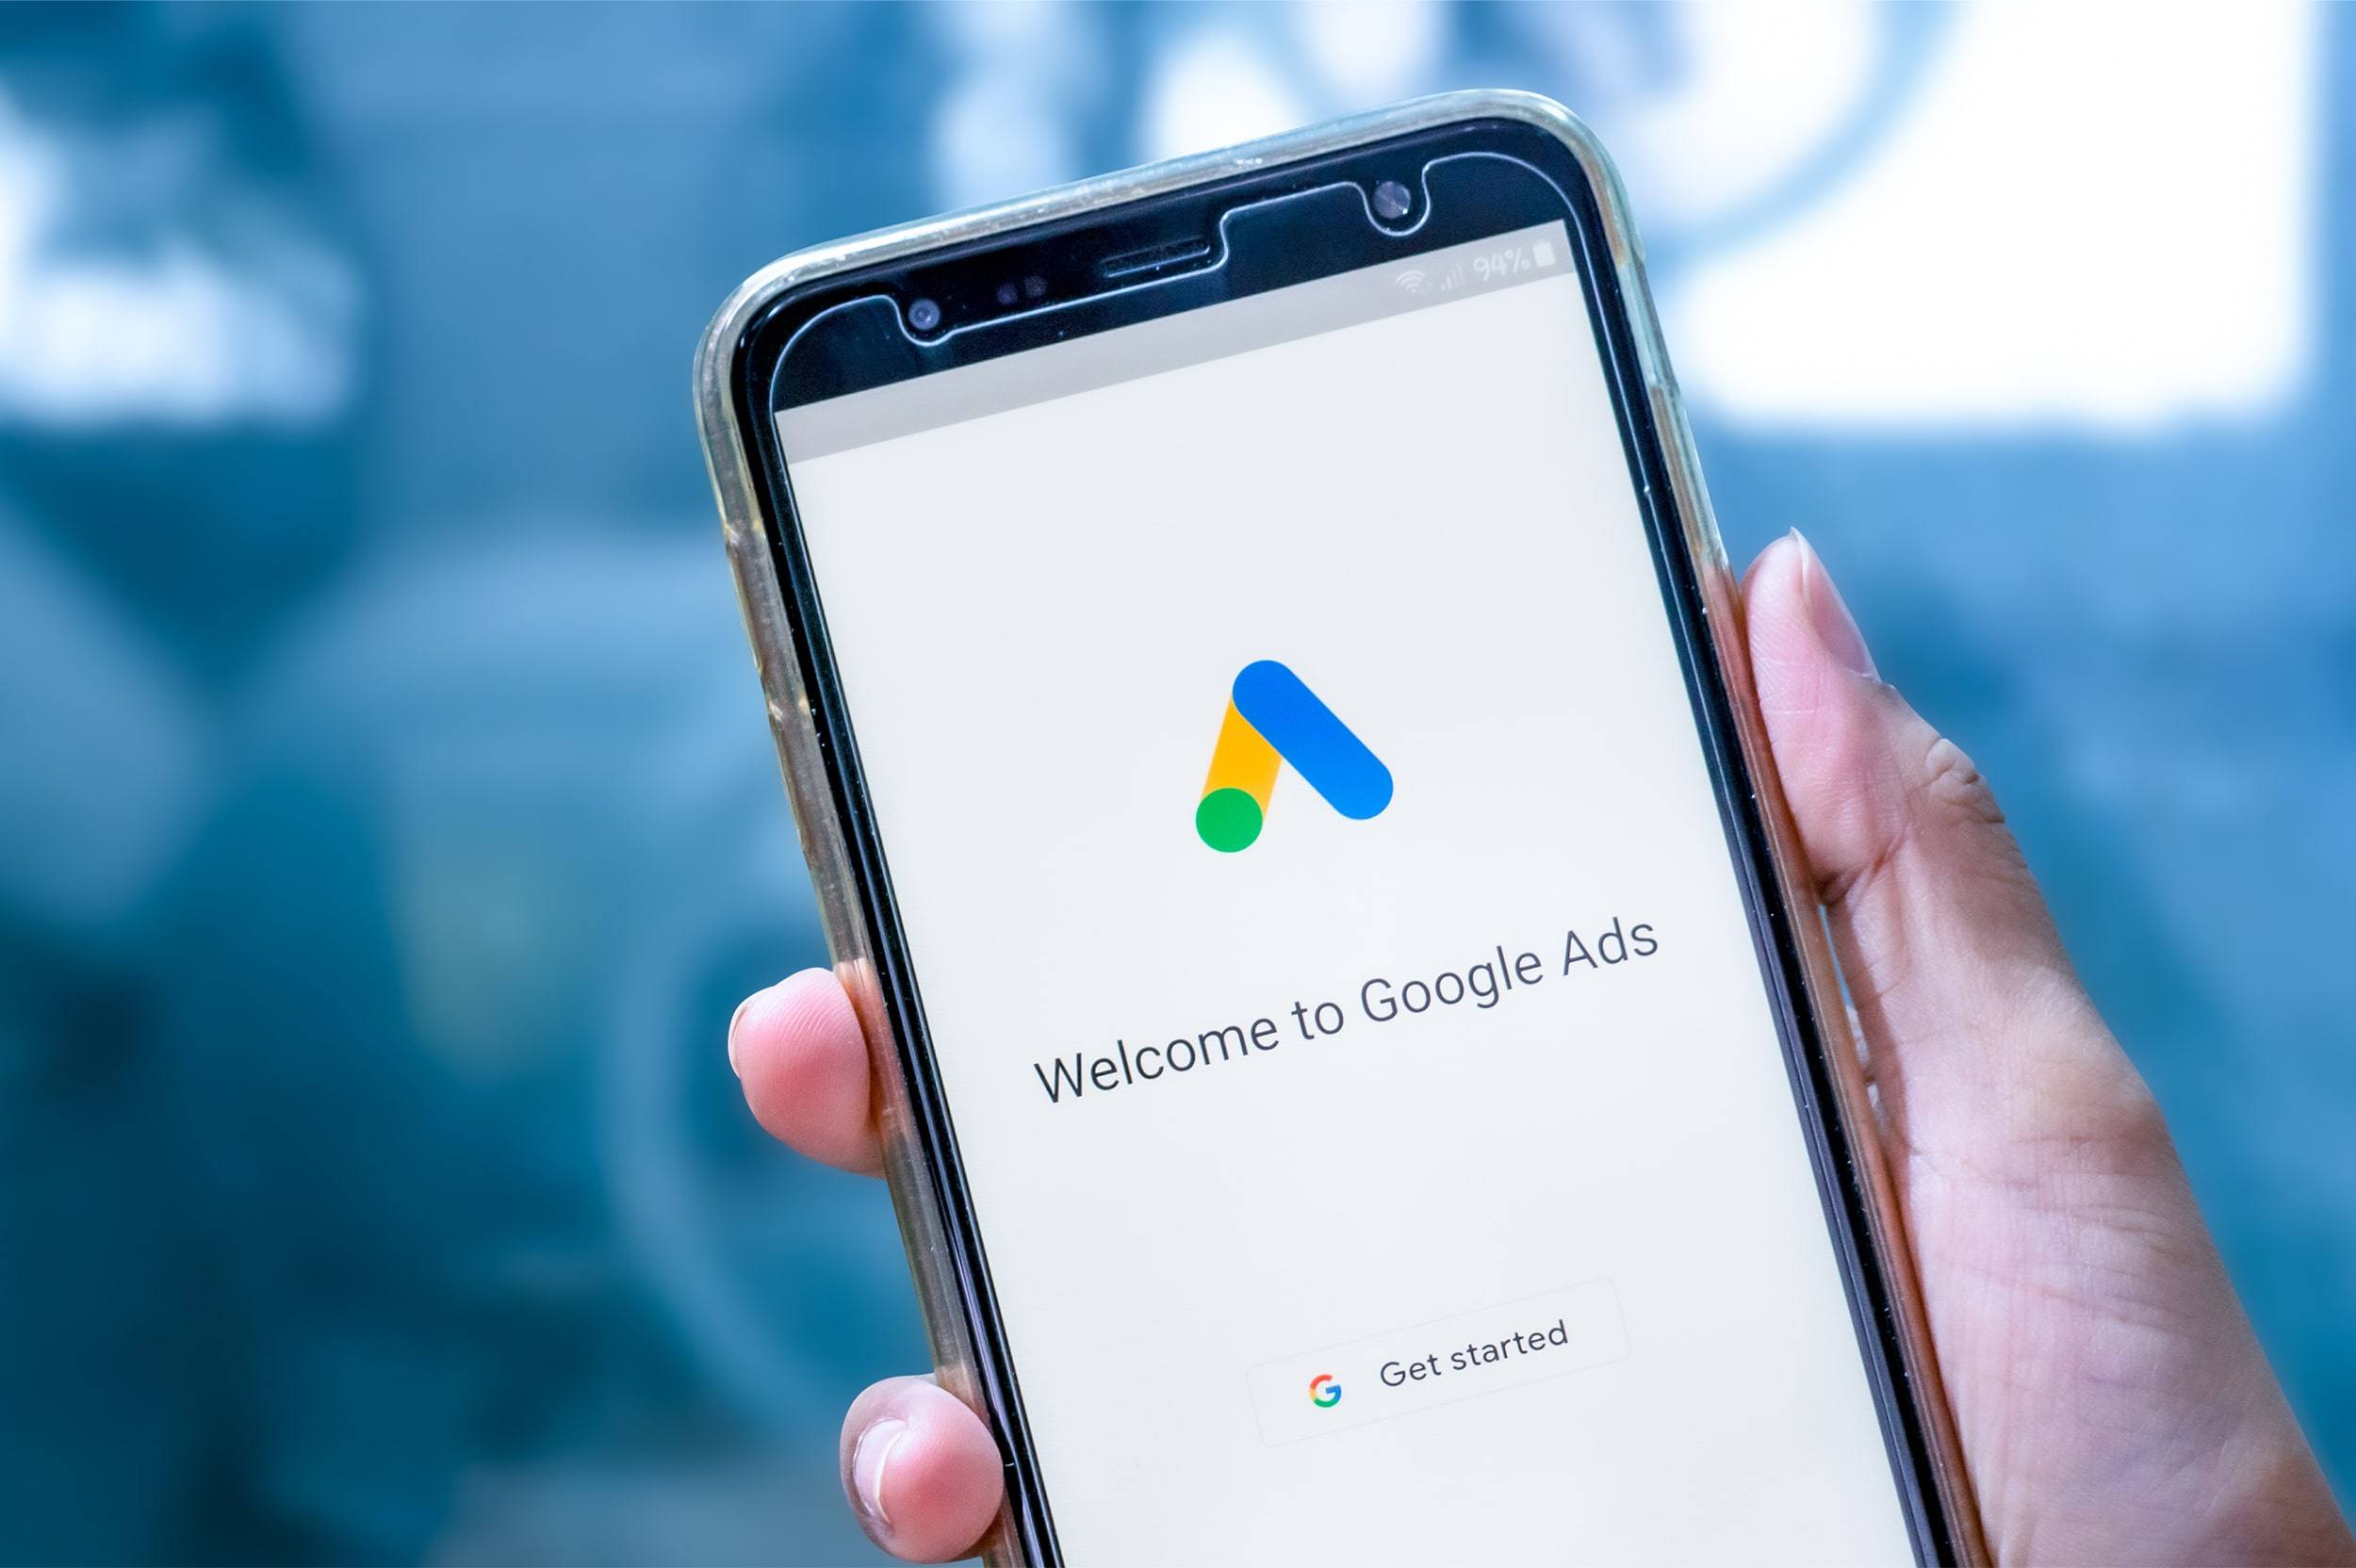 How to Use Google Ads: A Complete Walk - Through for 2021